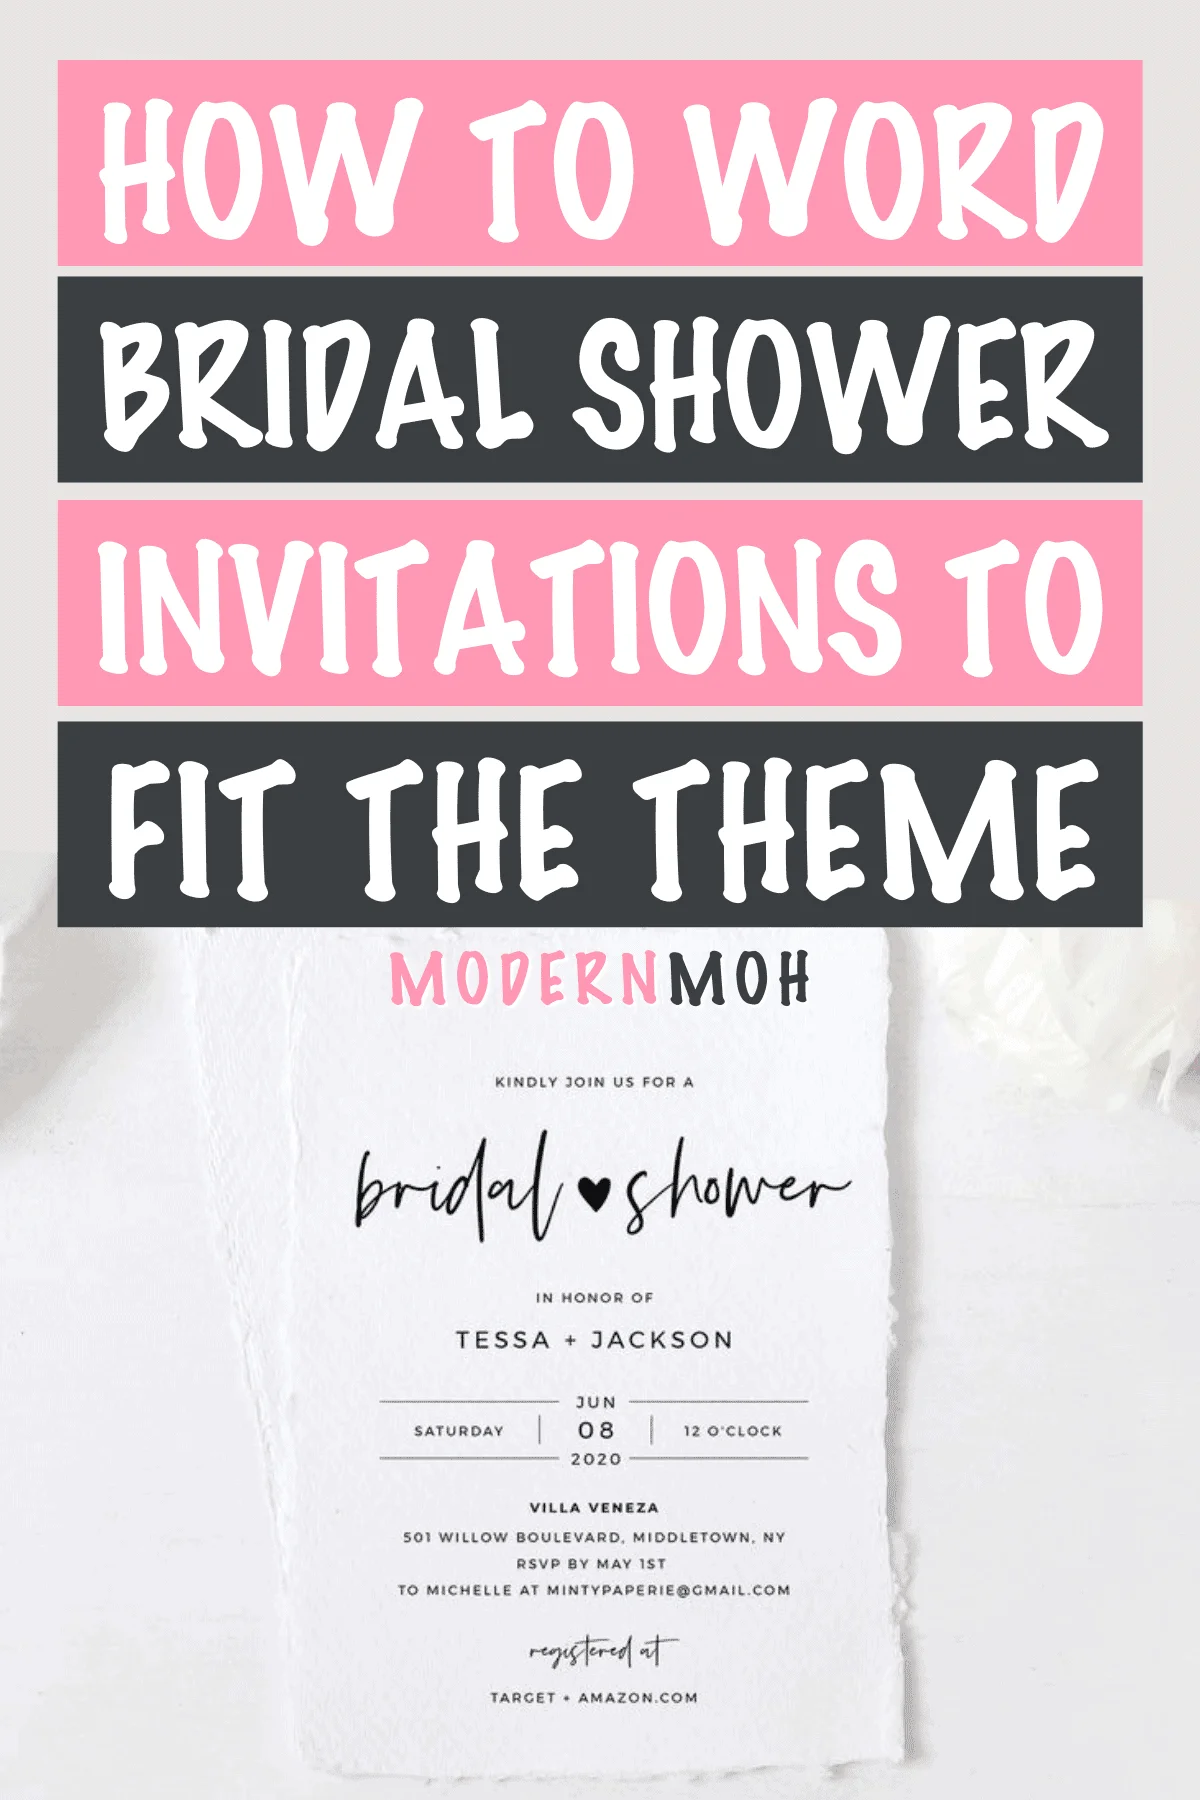 Bridal Shower Invitation Wording: Must-Have Details and Examples